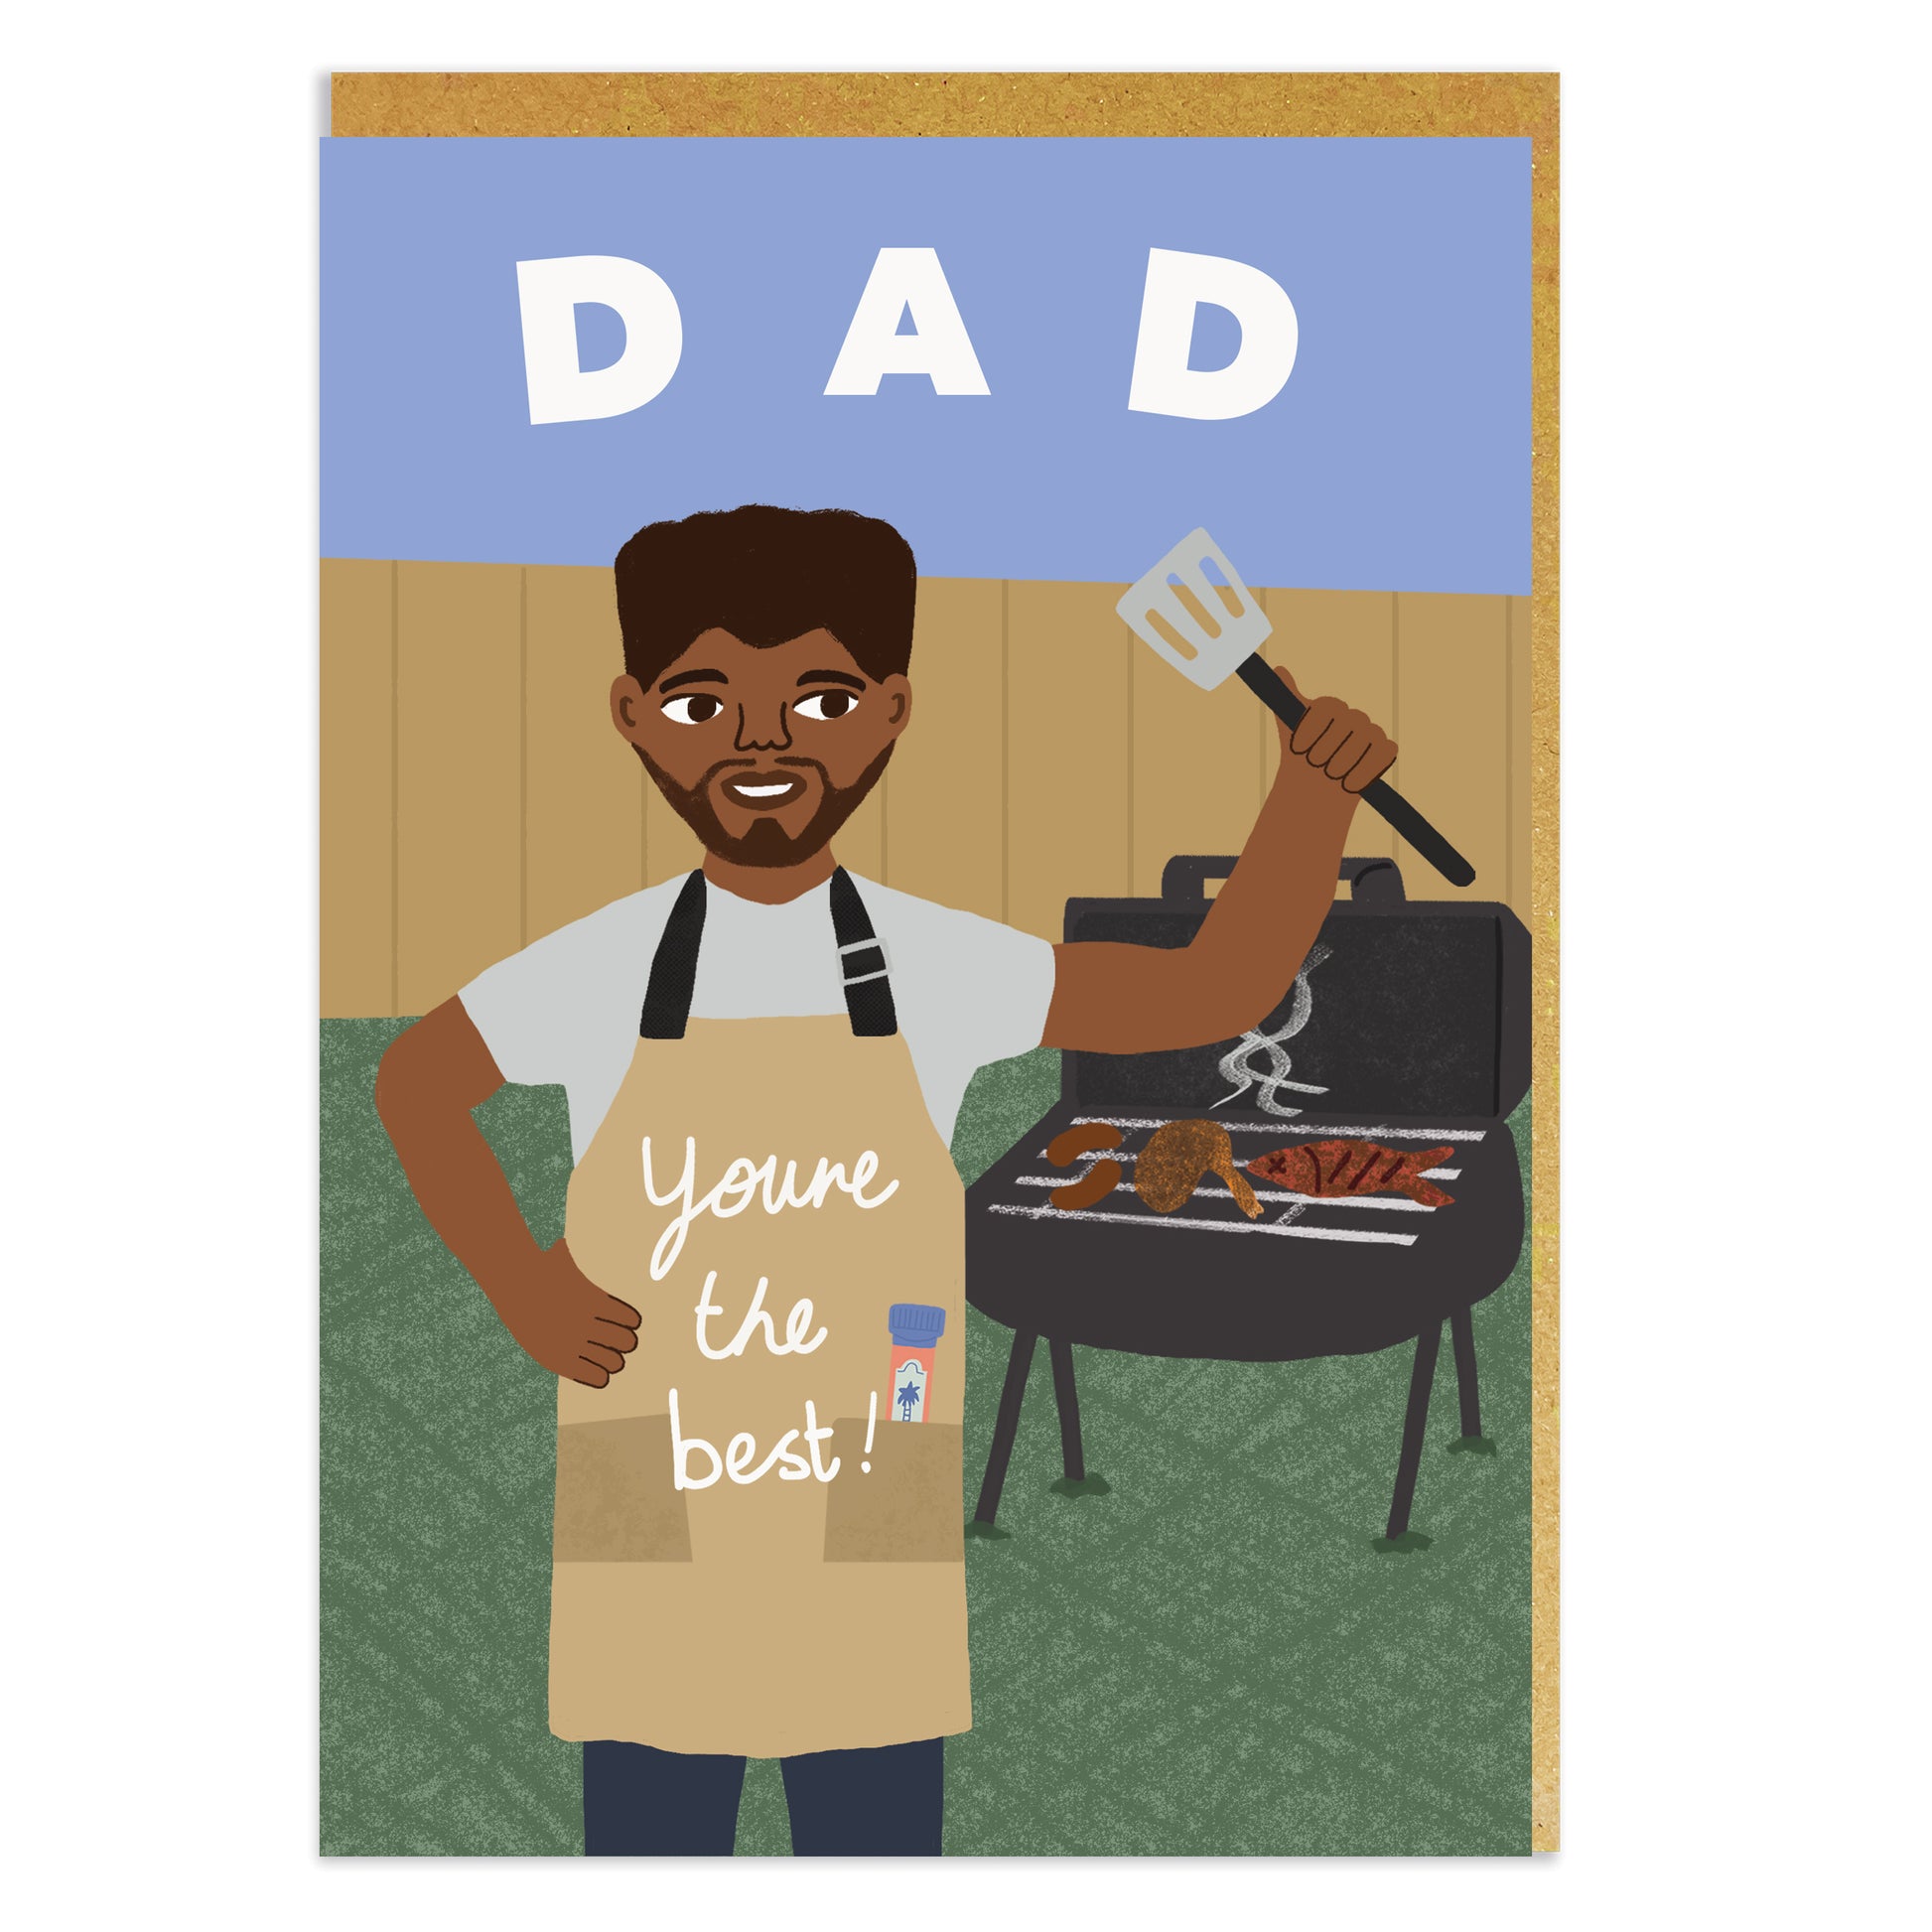 Dad you're the best. Black Father's Day card, or birthday card. Cards celebrating black culture